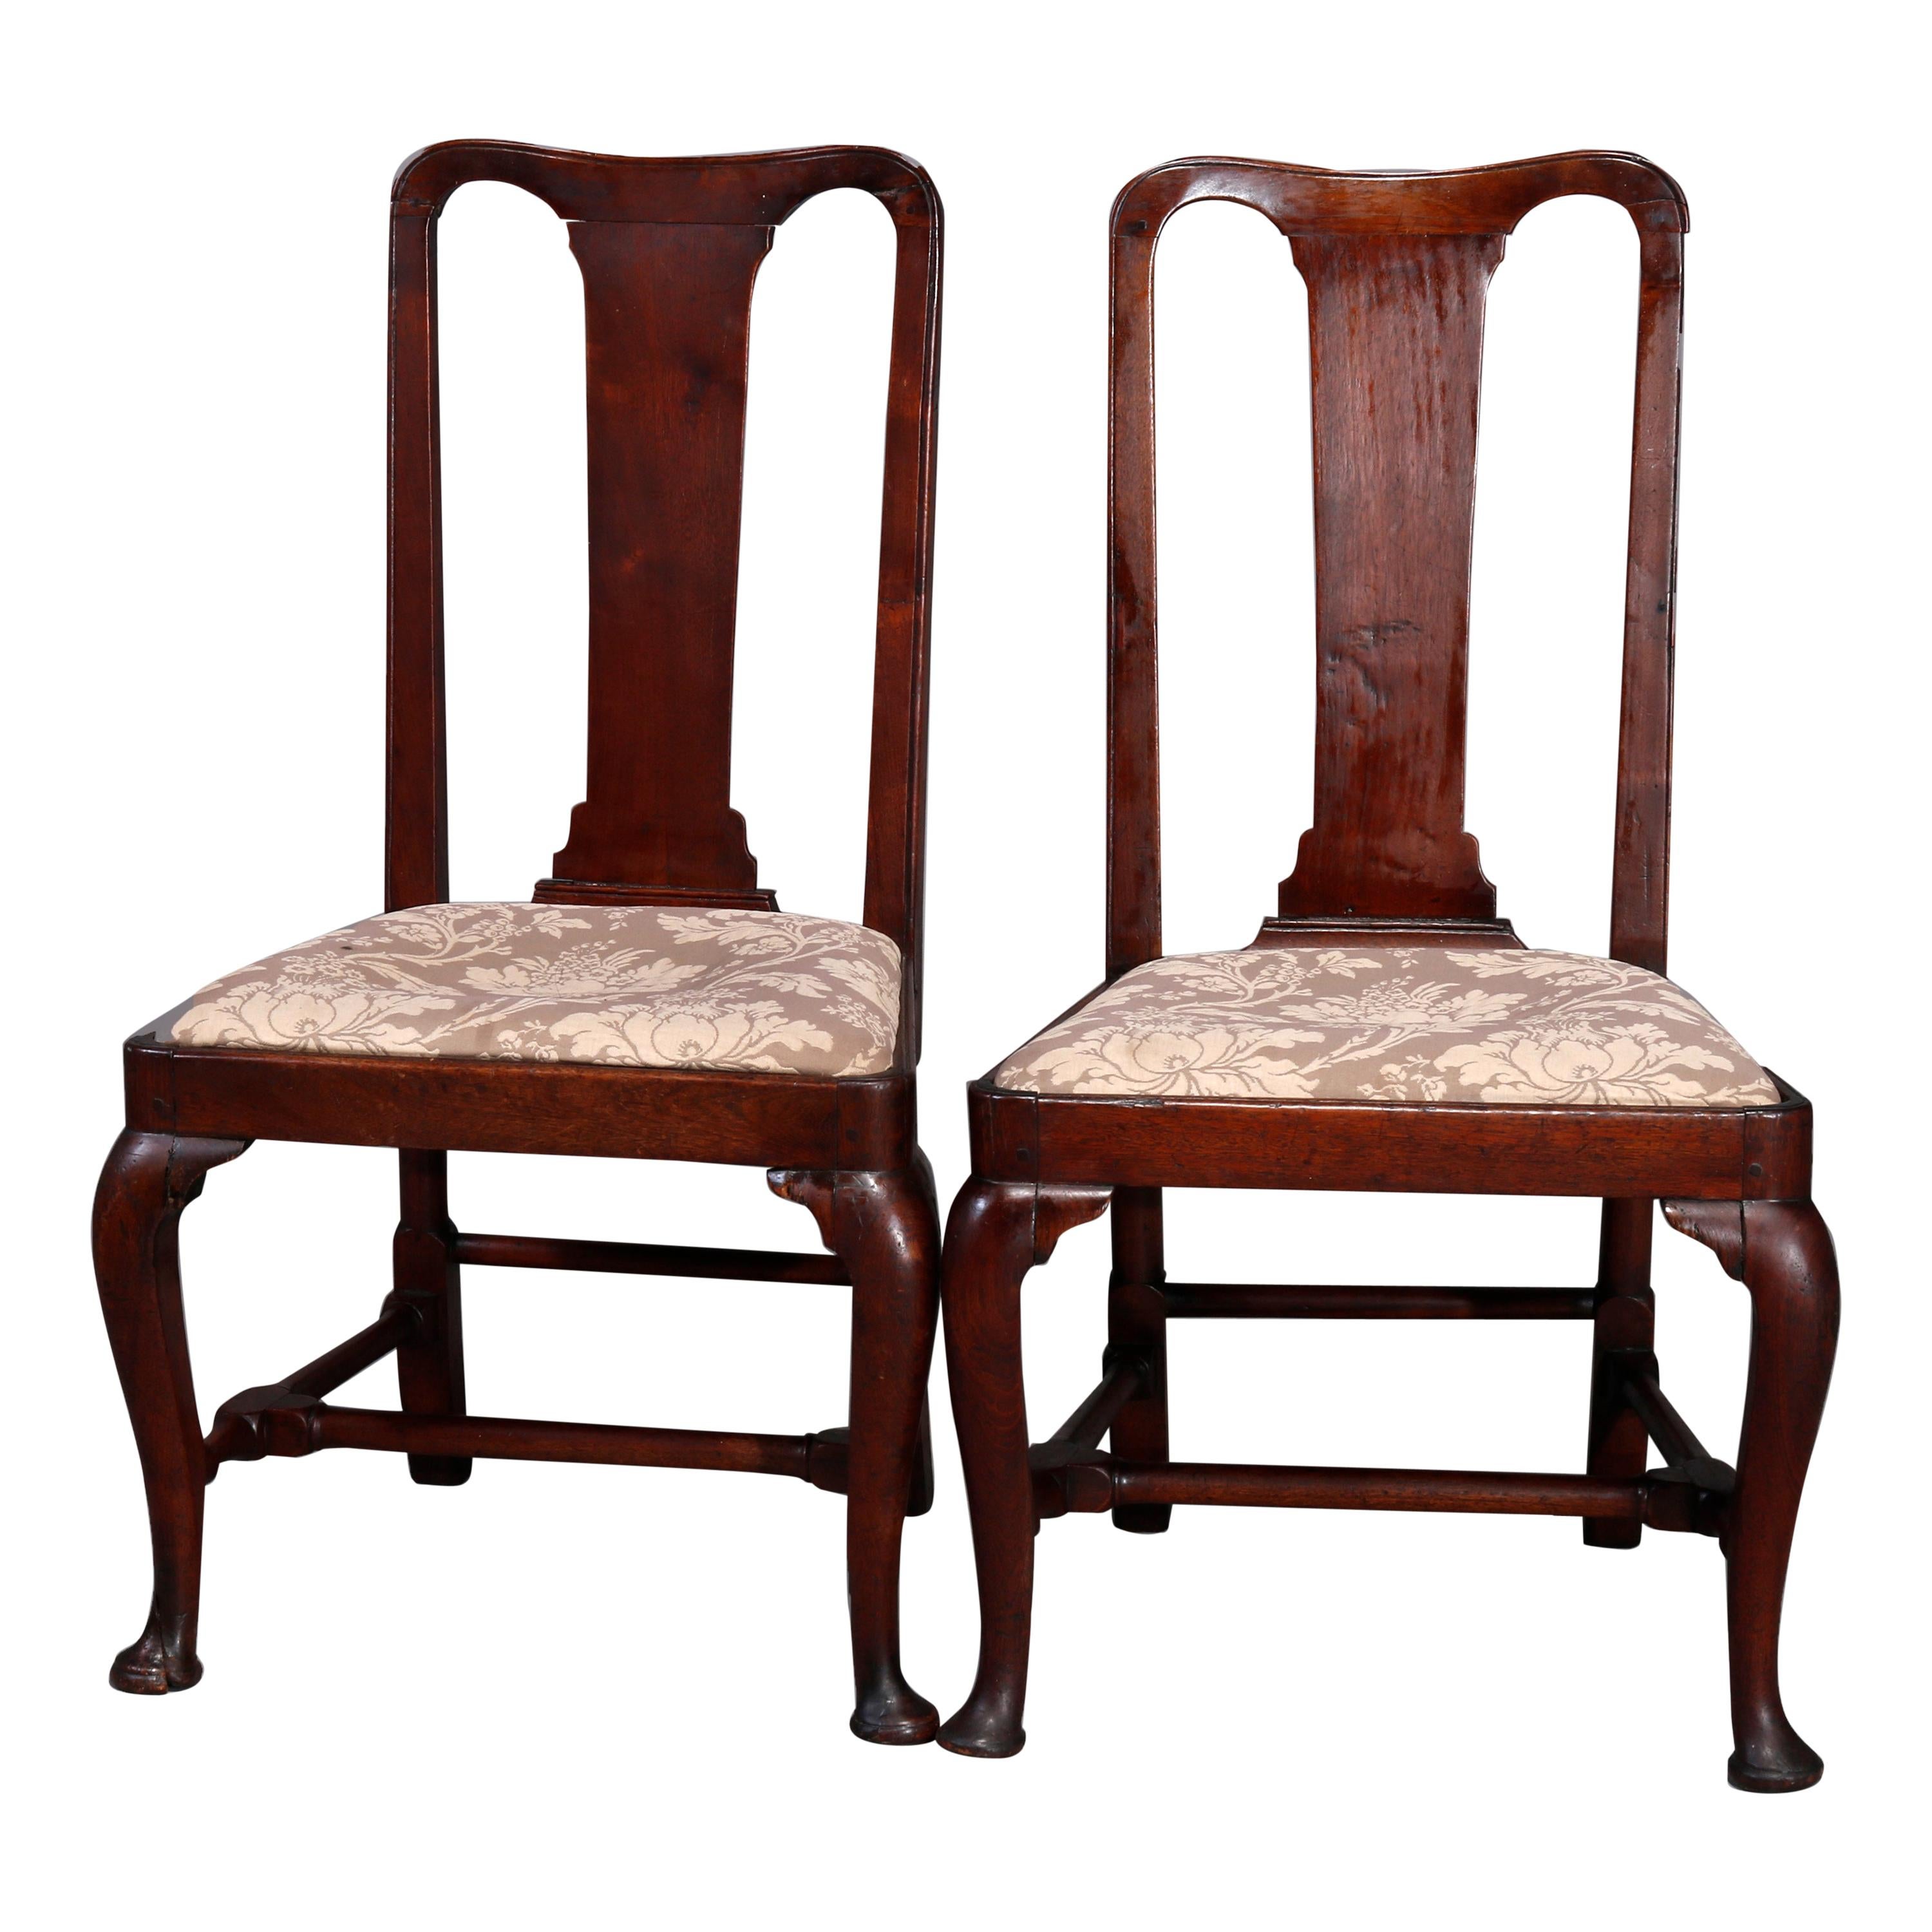 Antique Pair of Queen Anne New England Carved Mahogany Side Chairs, Circa 1760 For Sale